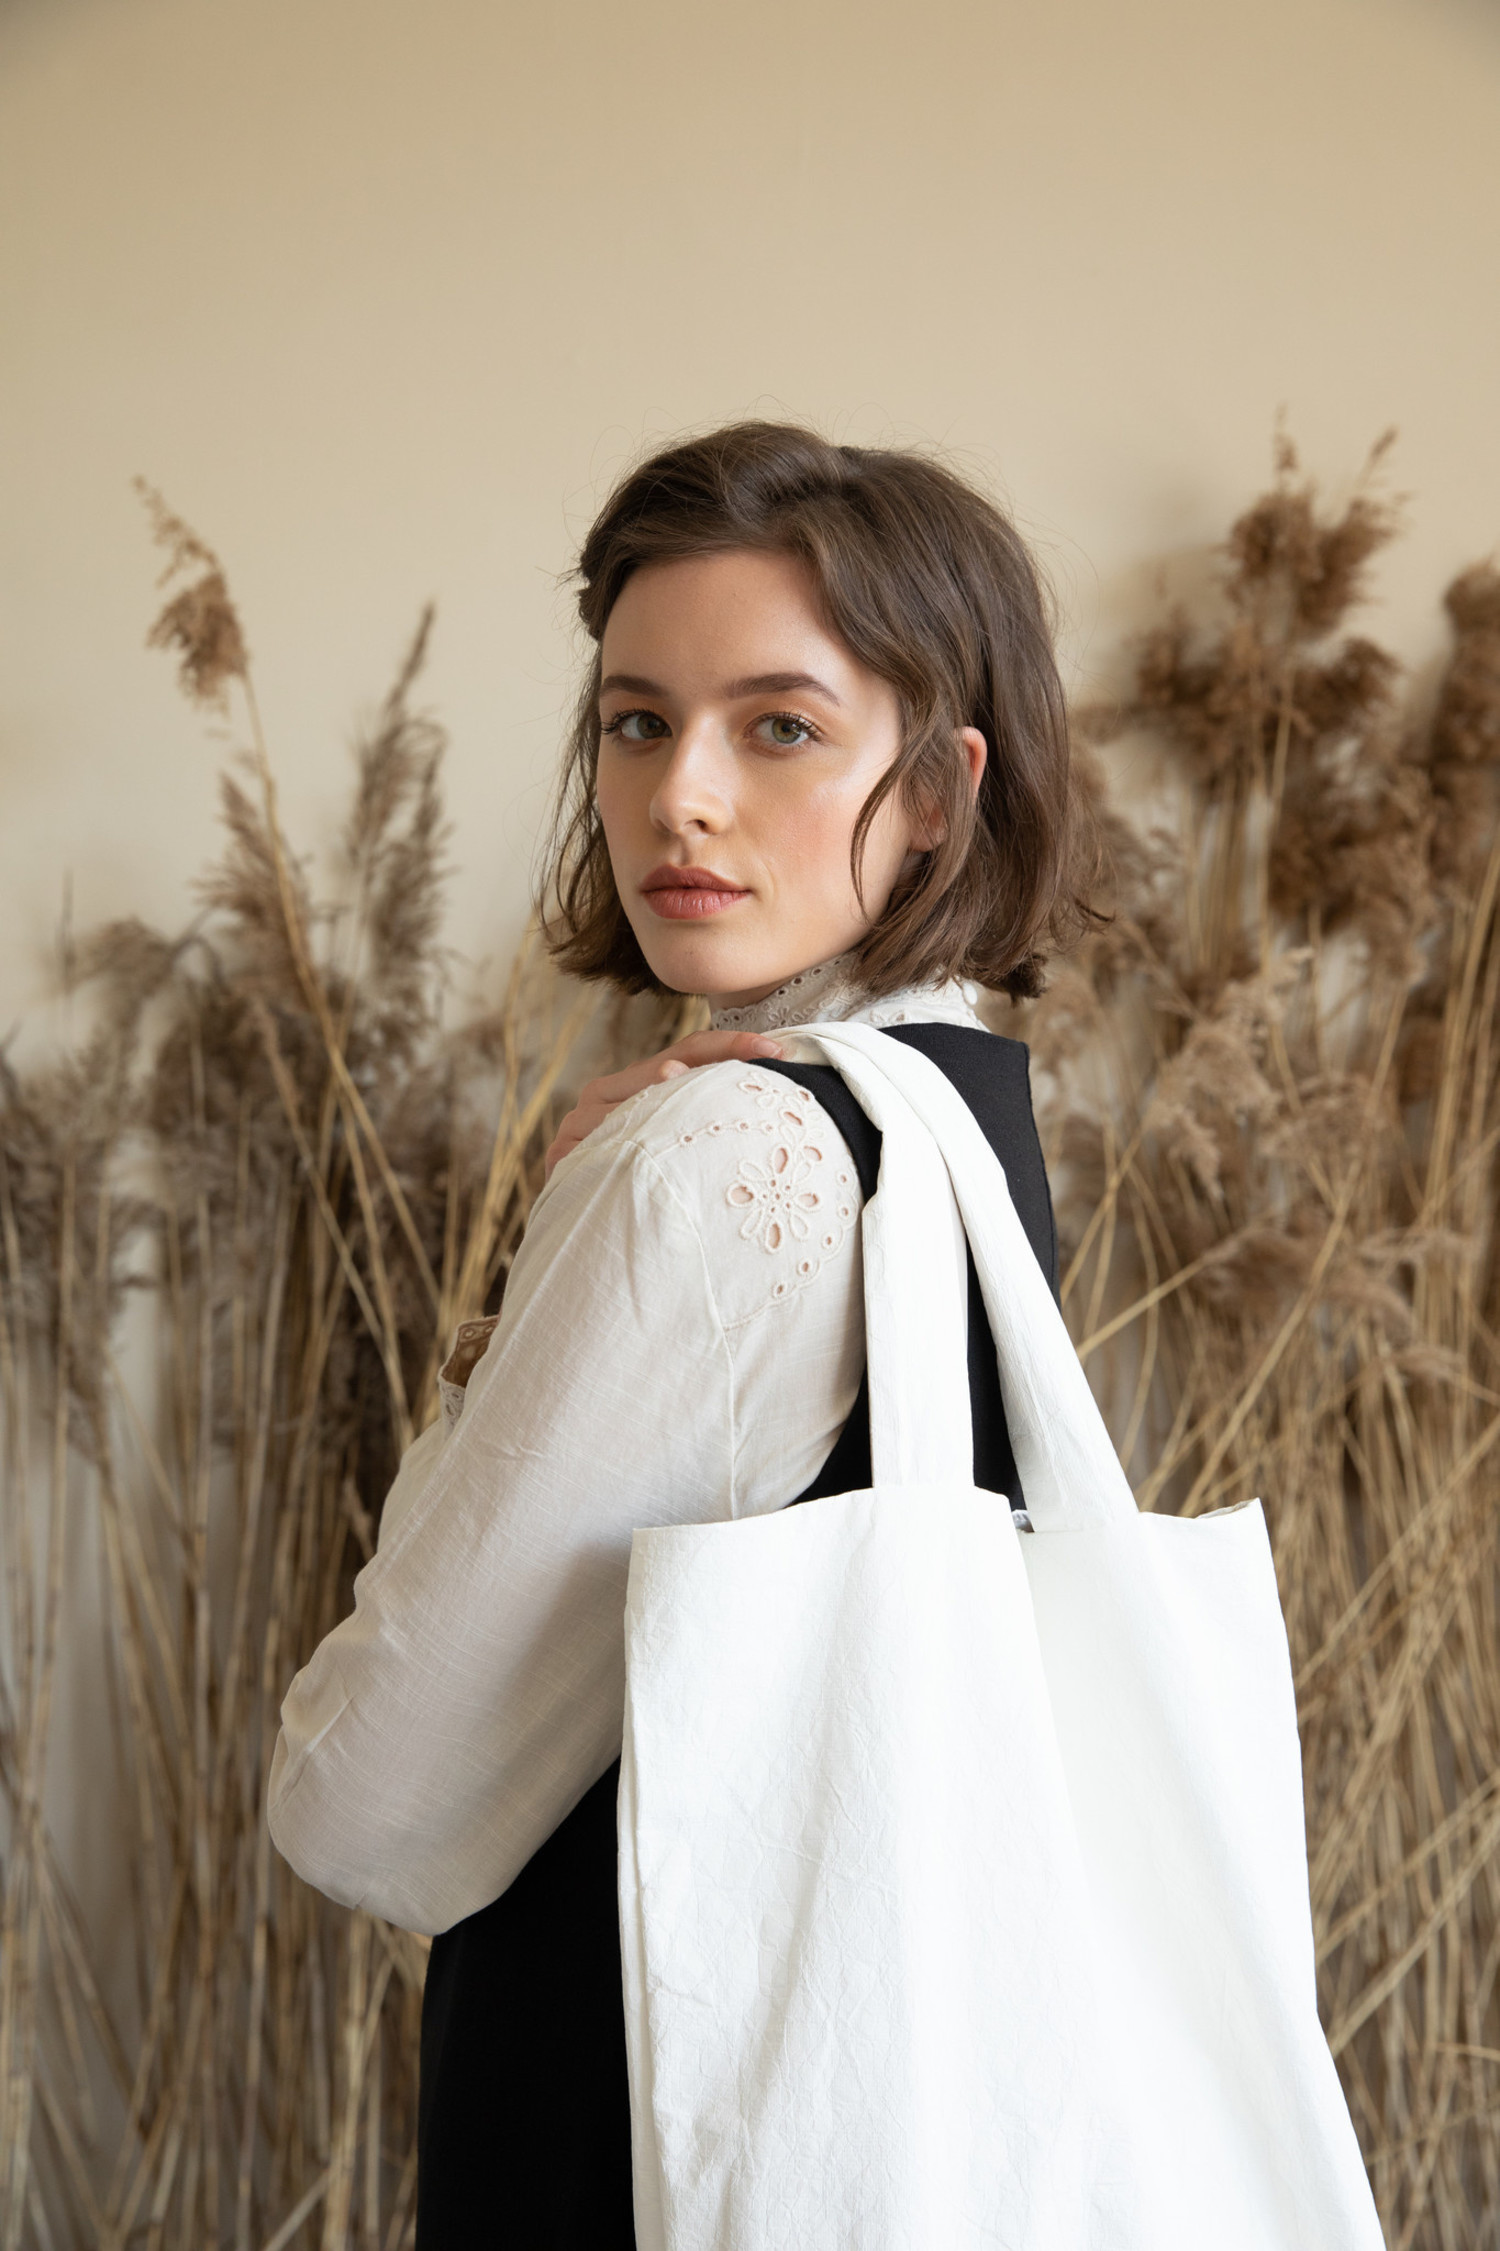 OFF-WHITE: tote bags for woman